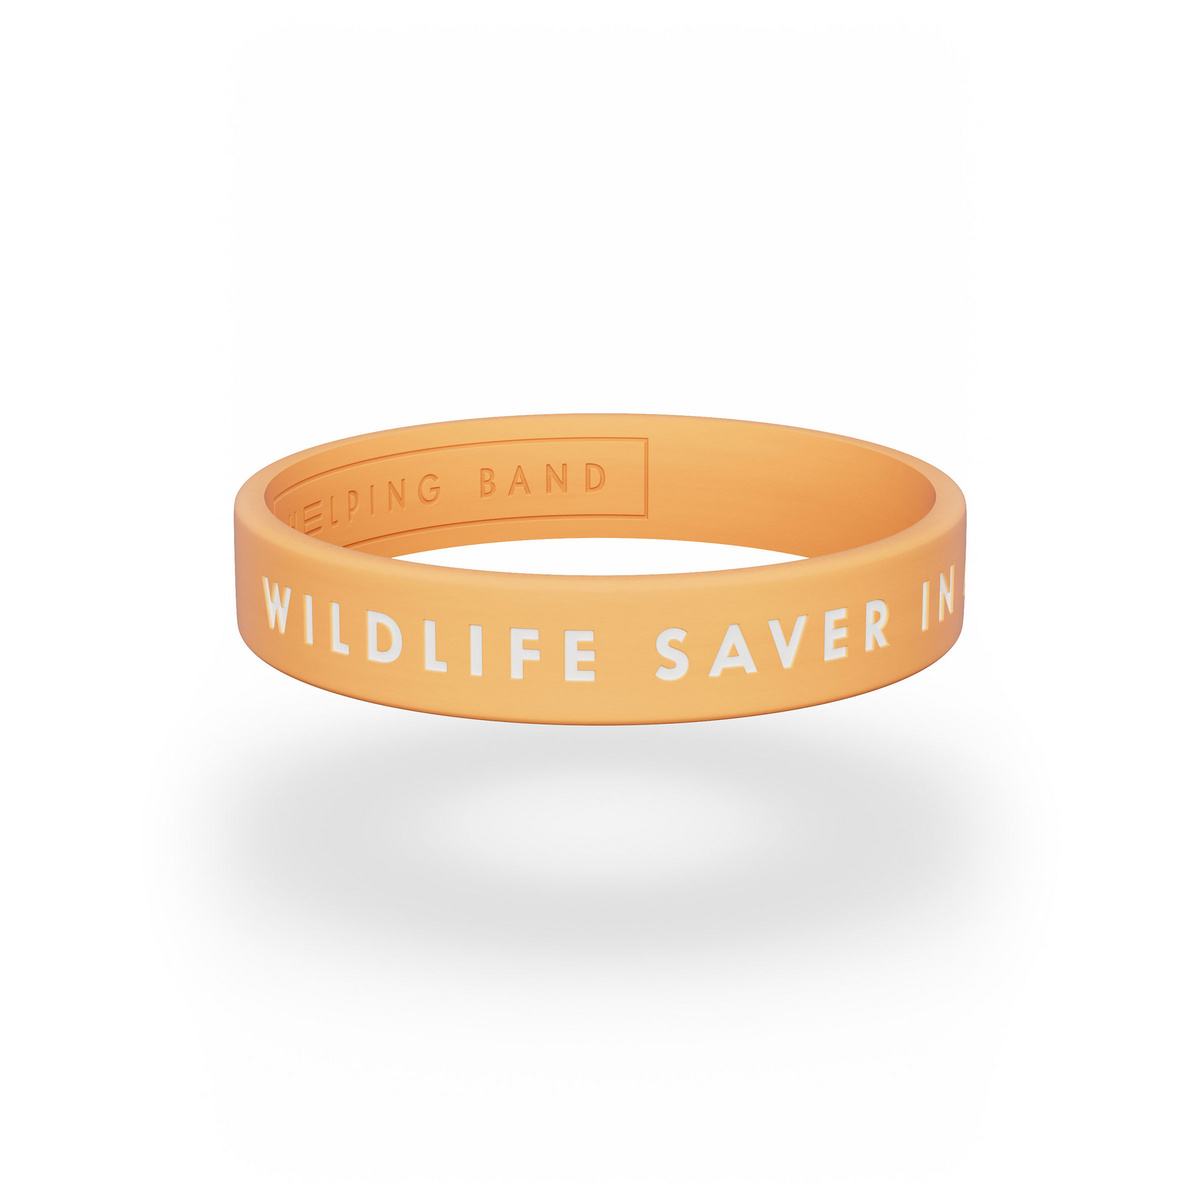 Helping Band Wildlife Saver in Action Armband